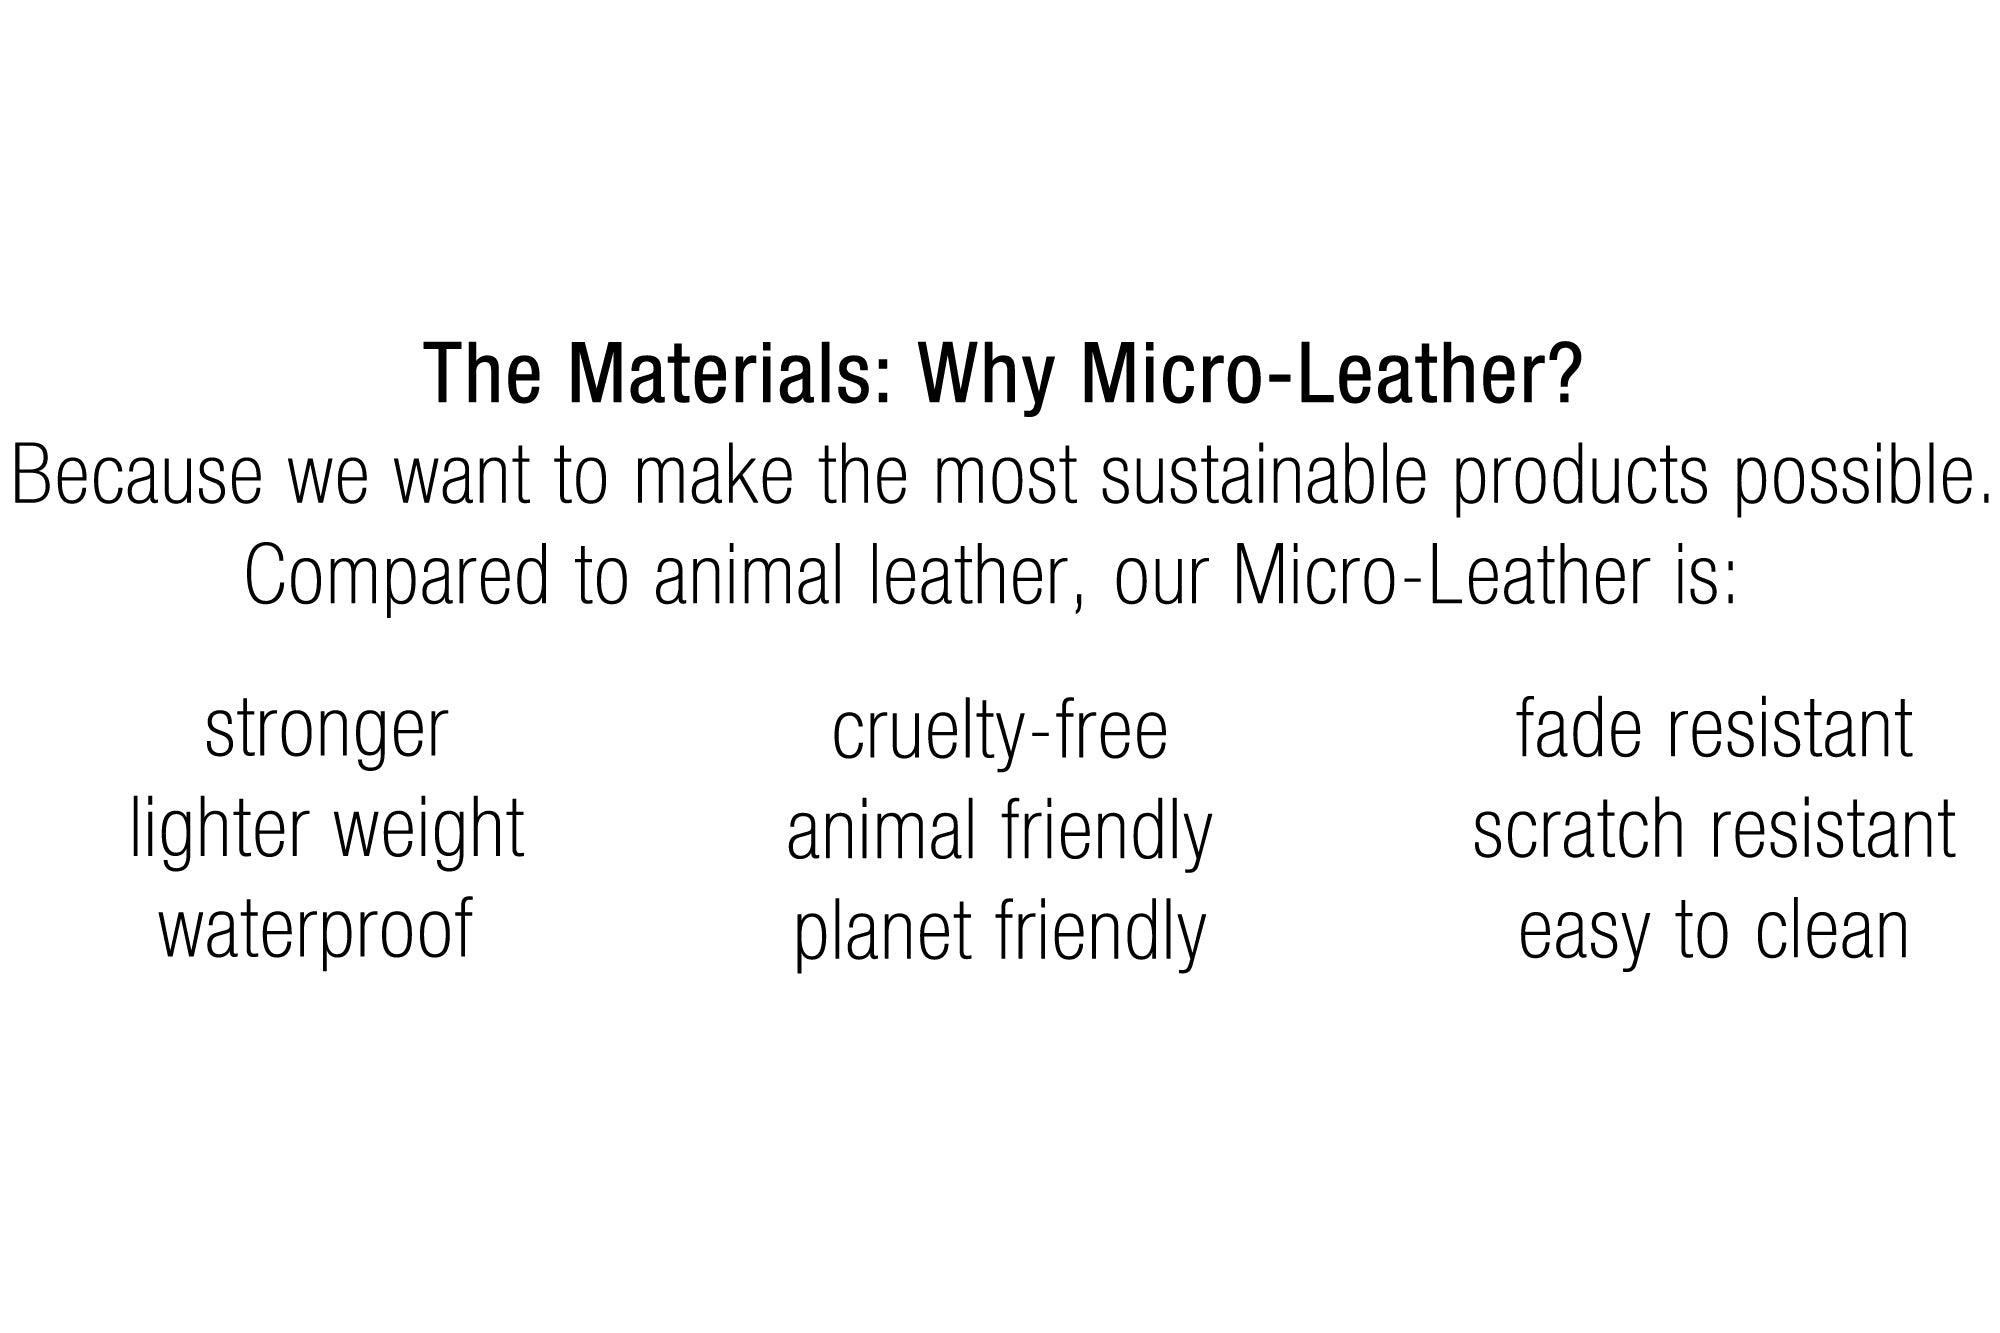 STERTHOUS - vegan leather | sustainable product design | made in USA